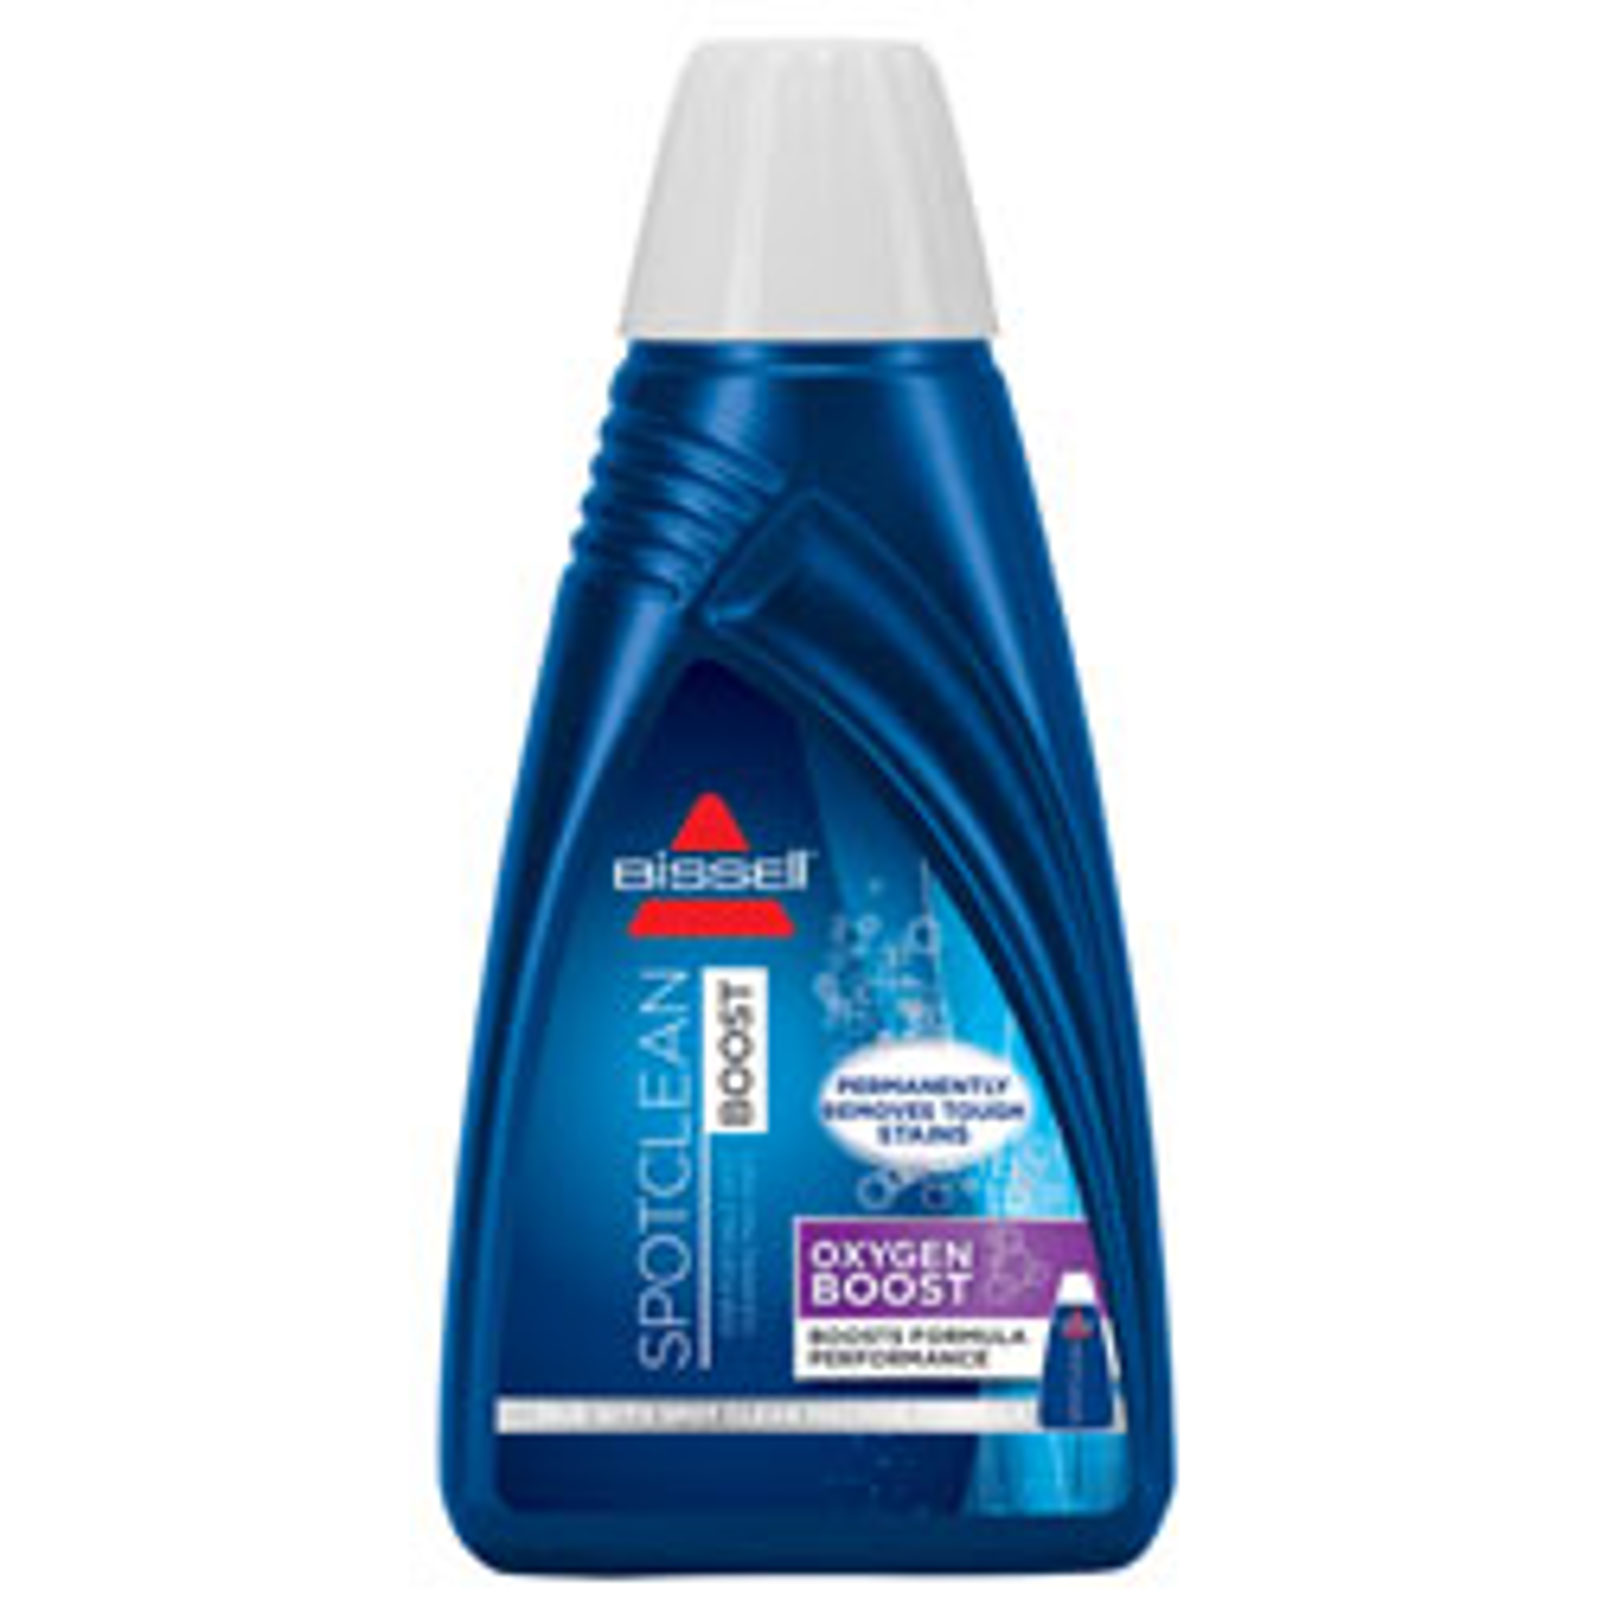 Bissell Spot Clean Boost Oxygen Boost Cleaning Formula &#8211; 16 Ounces